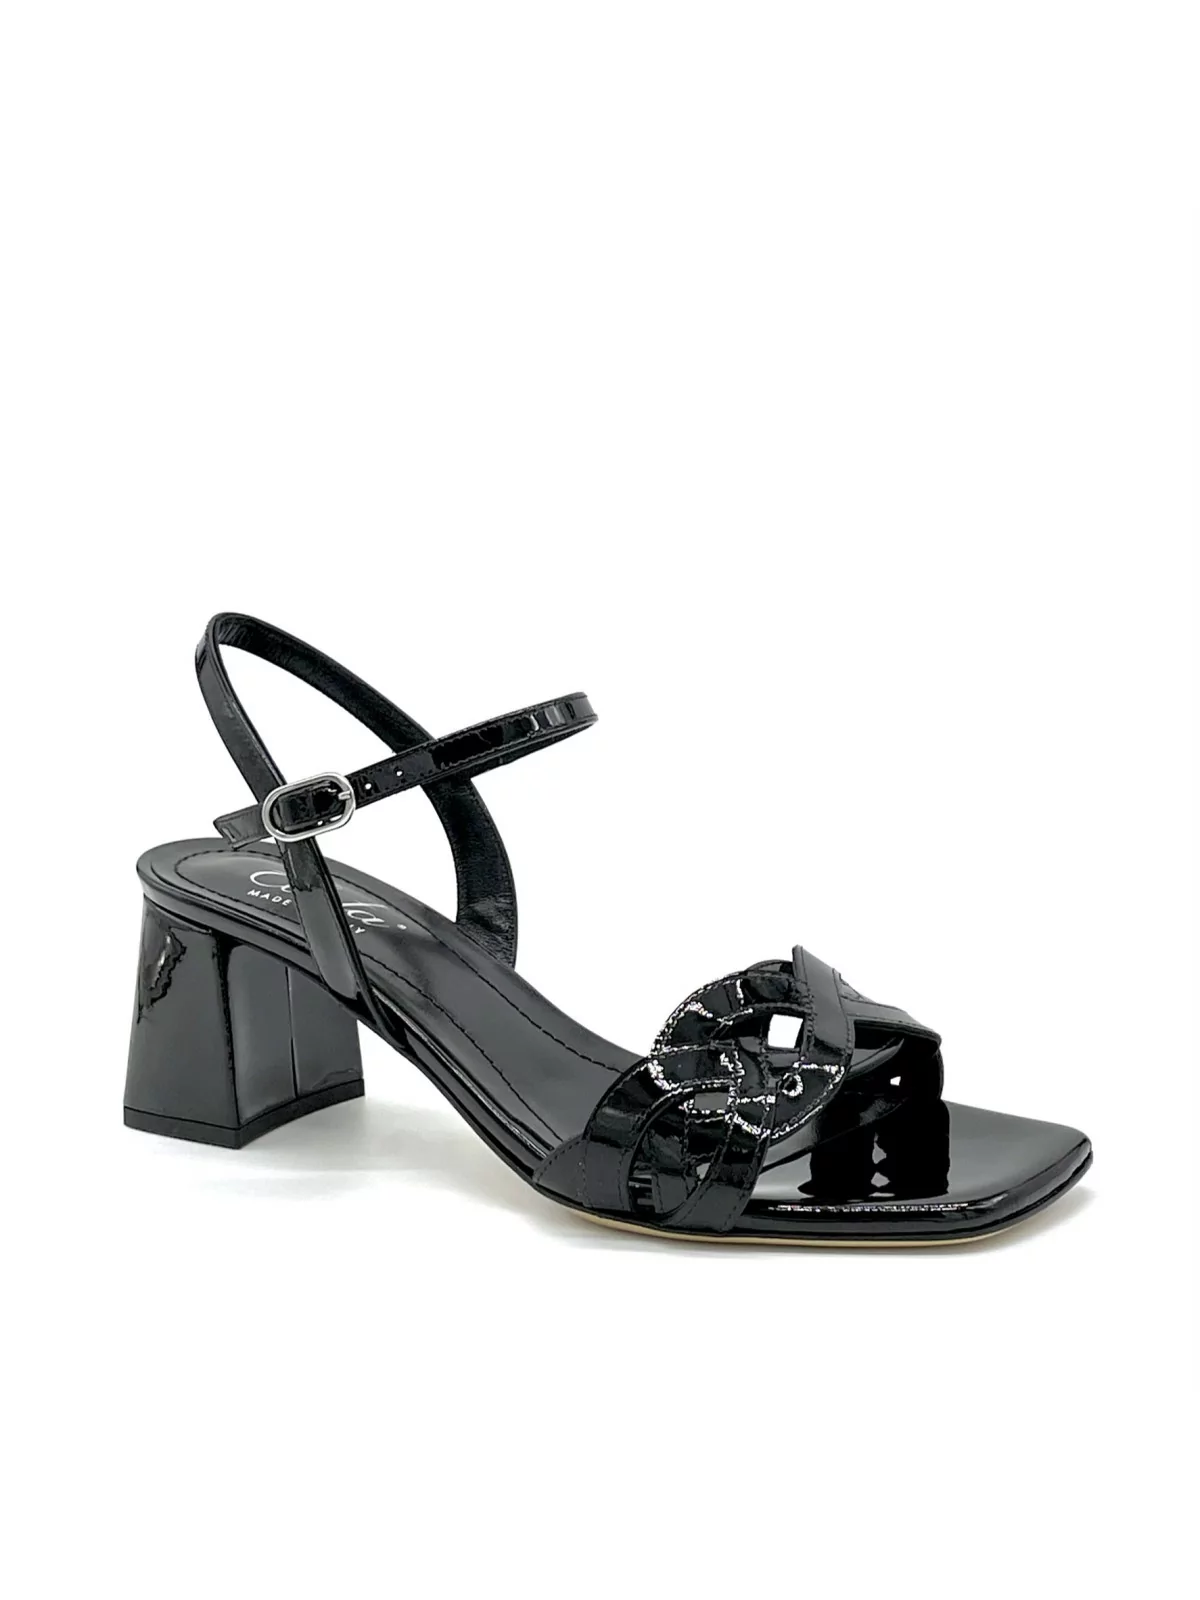 Black patent leather sandal with intertwined band. Leather lining. Leather sole.